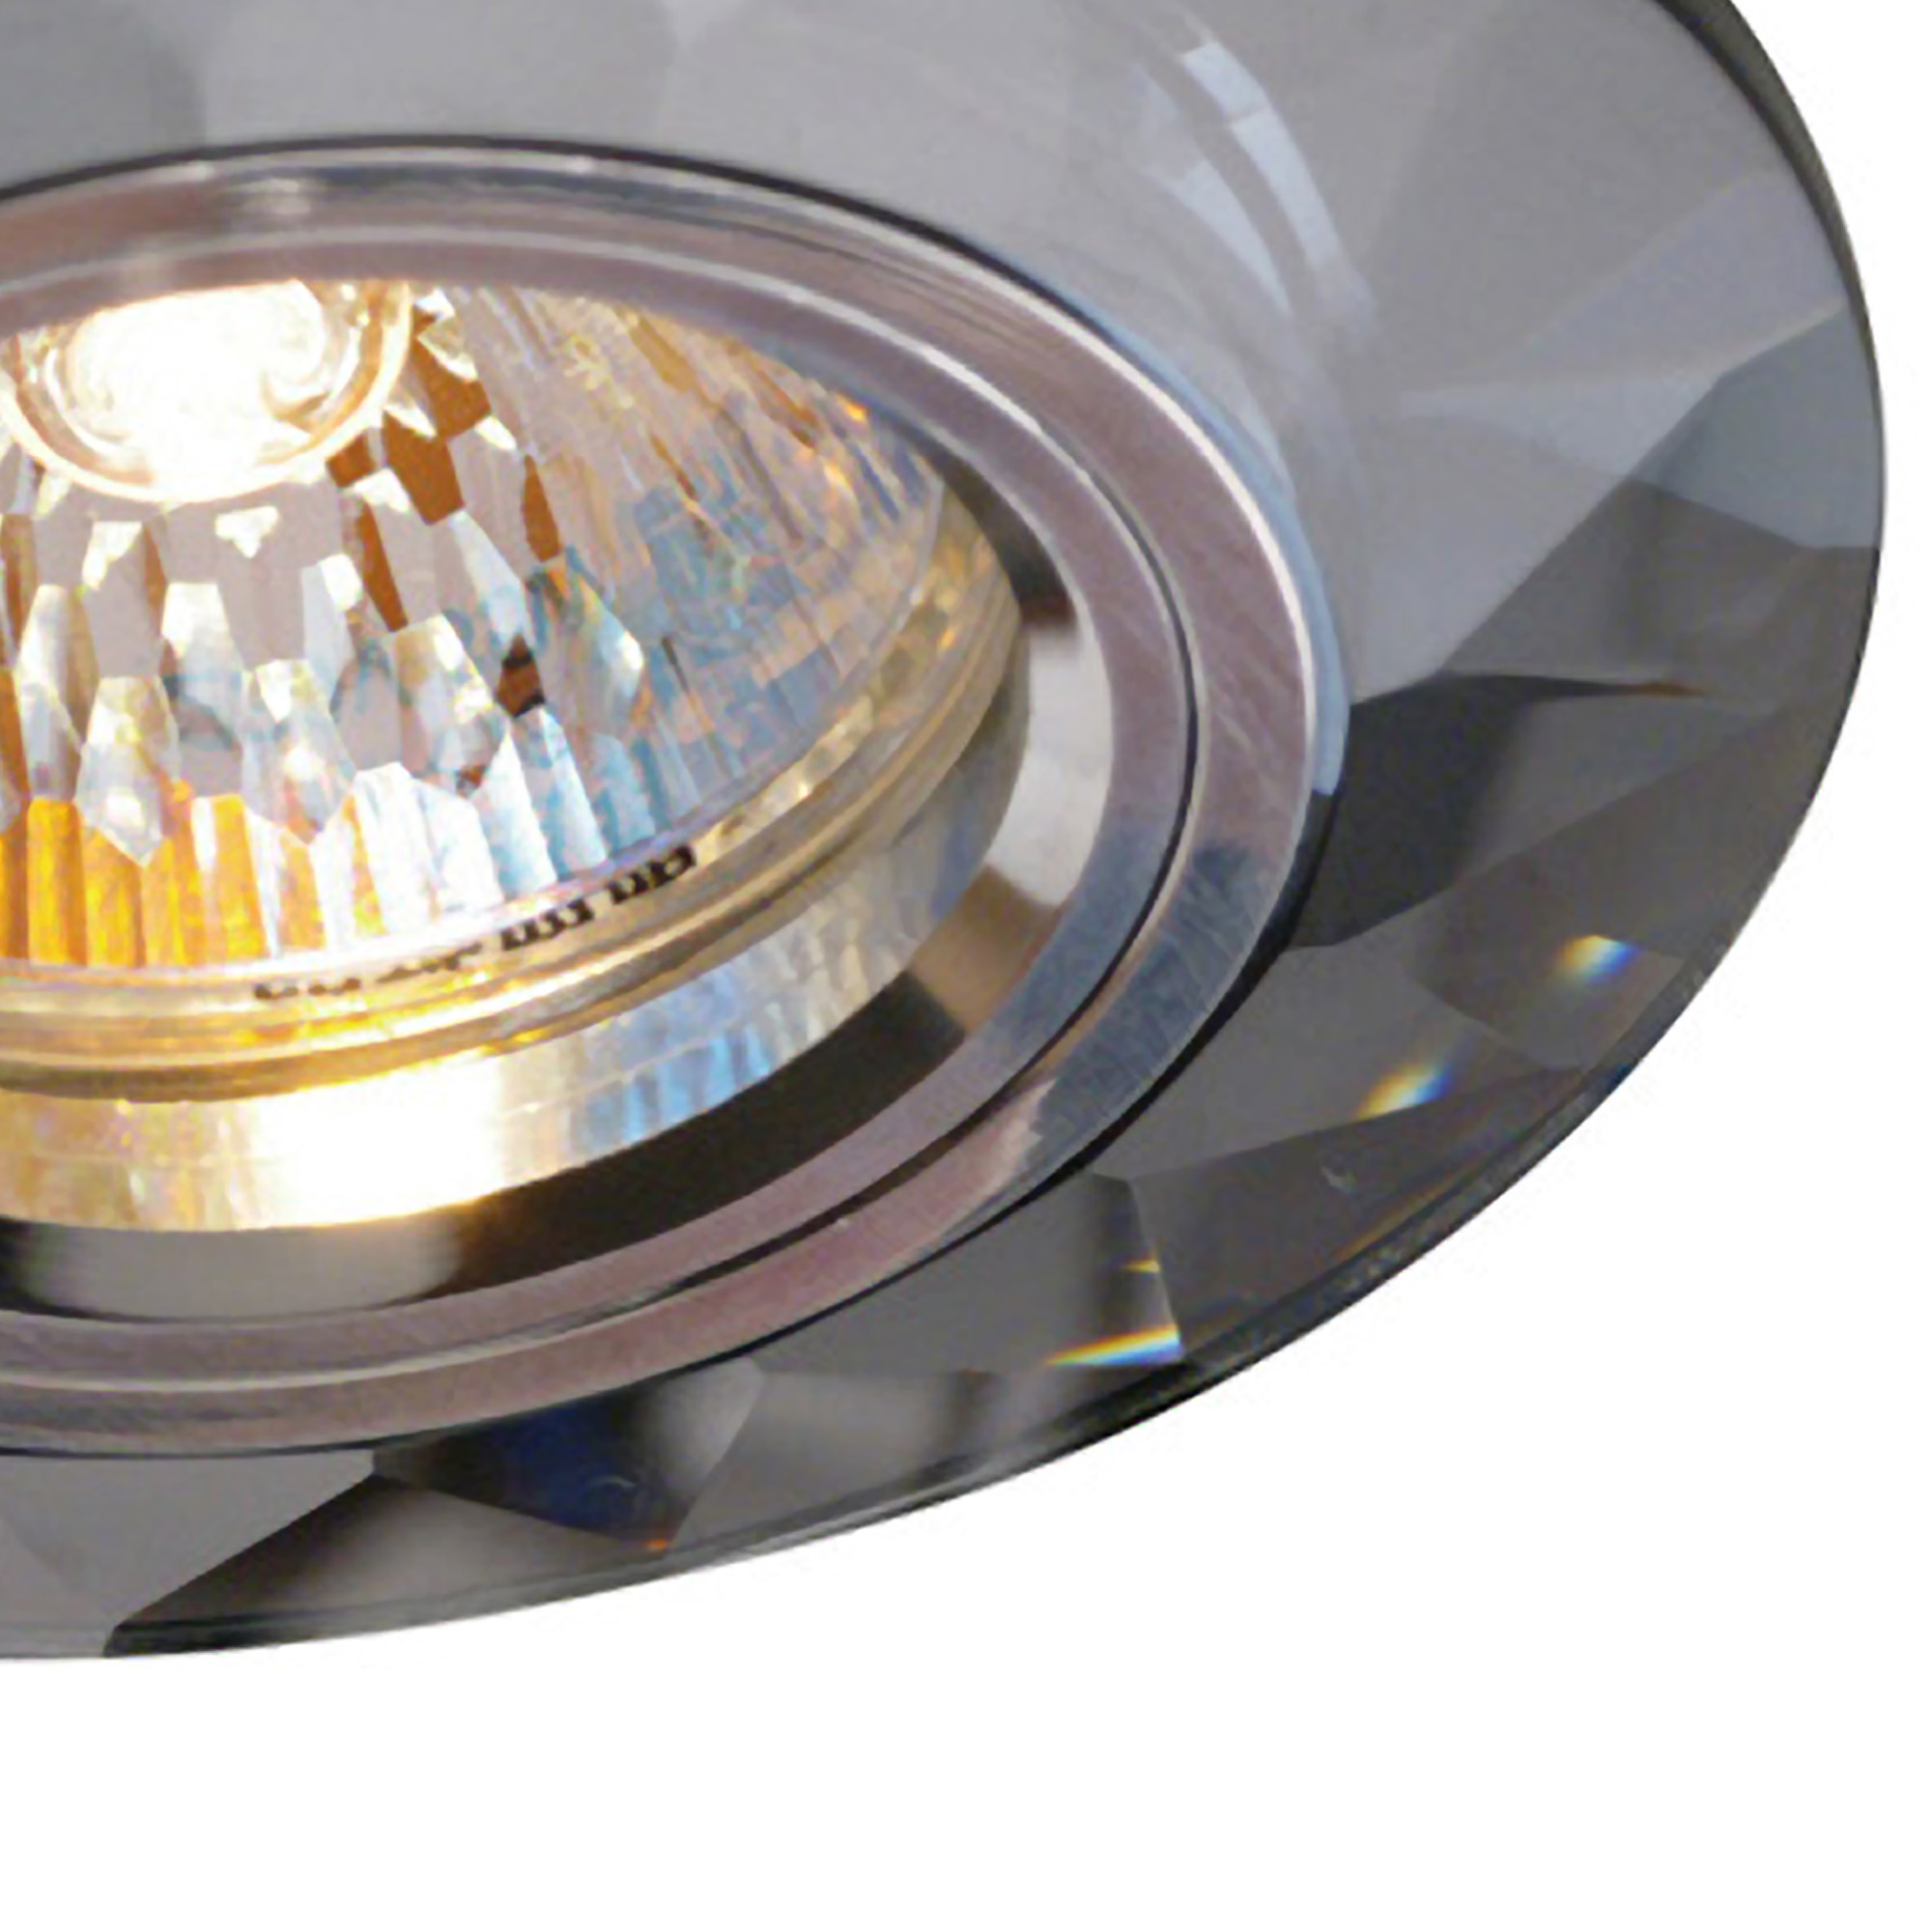 IL30816BL  Crystal Downlight Chamfered Round Rim Only Black